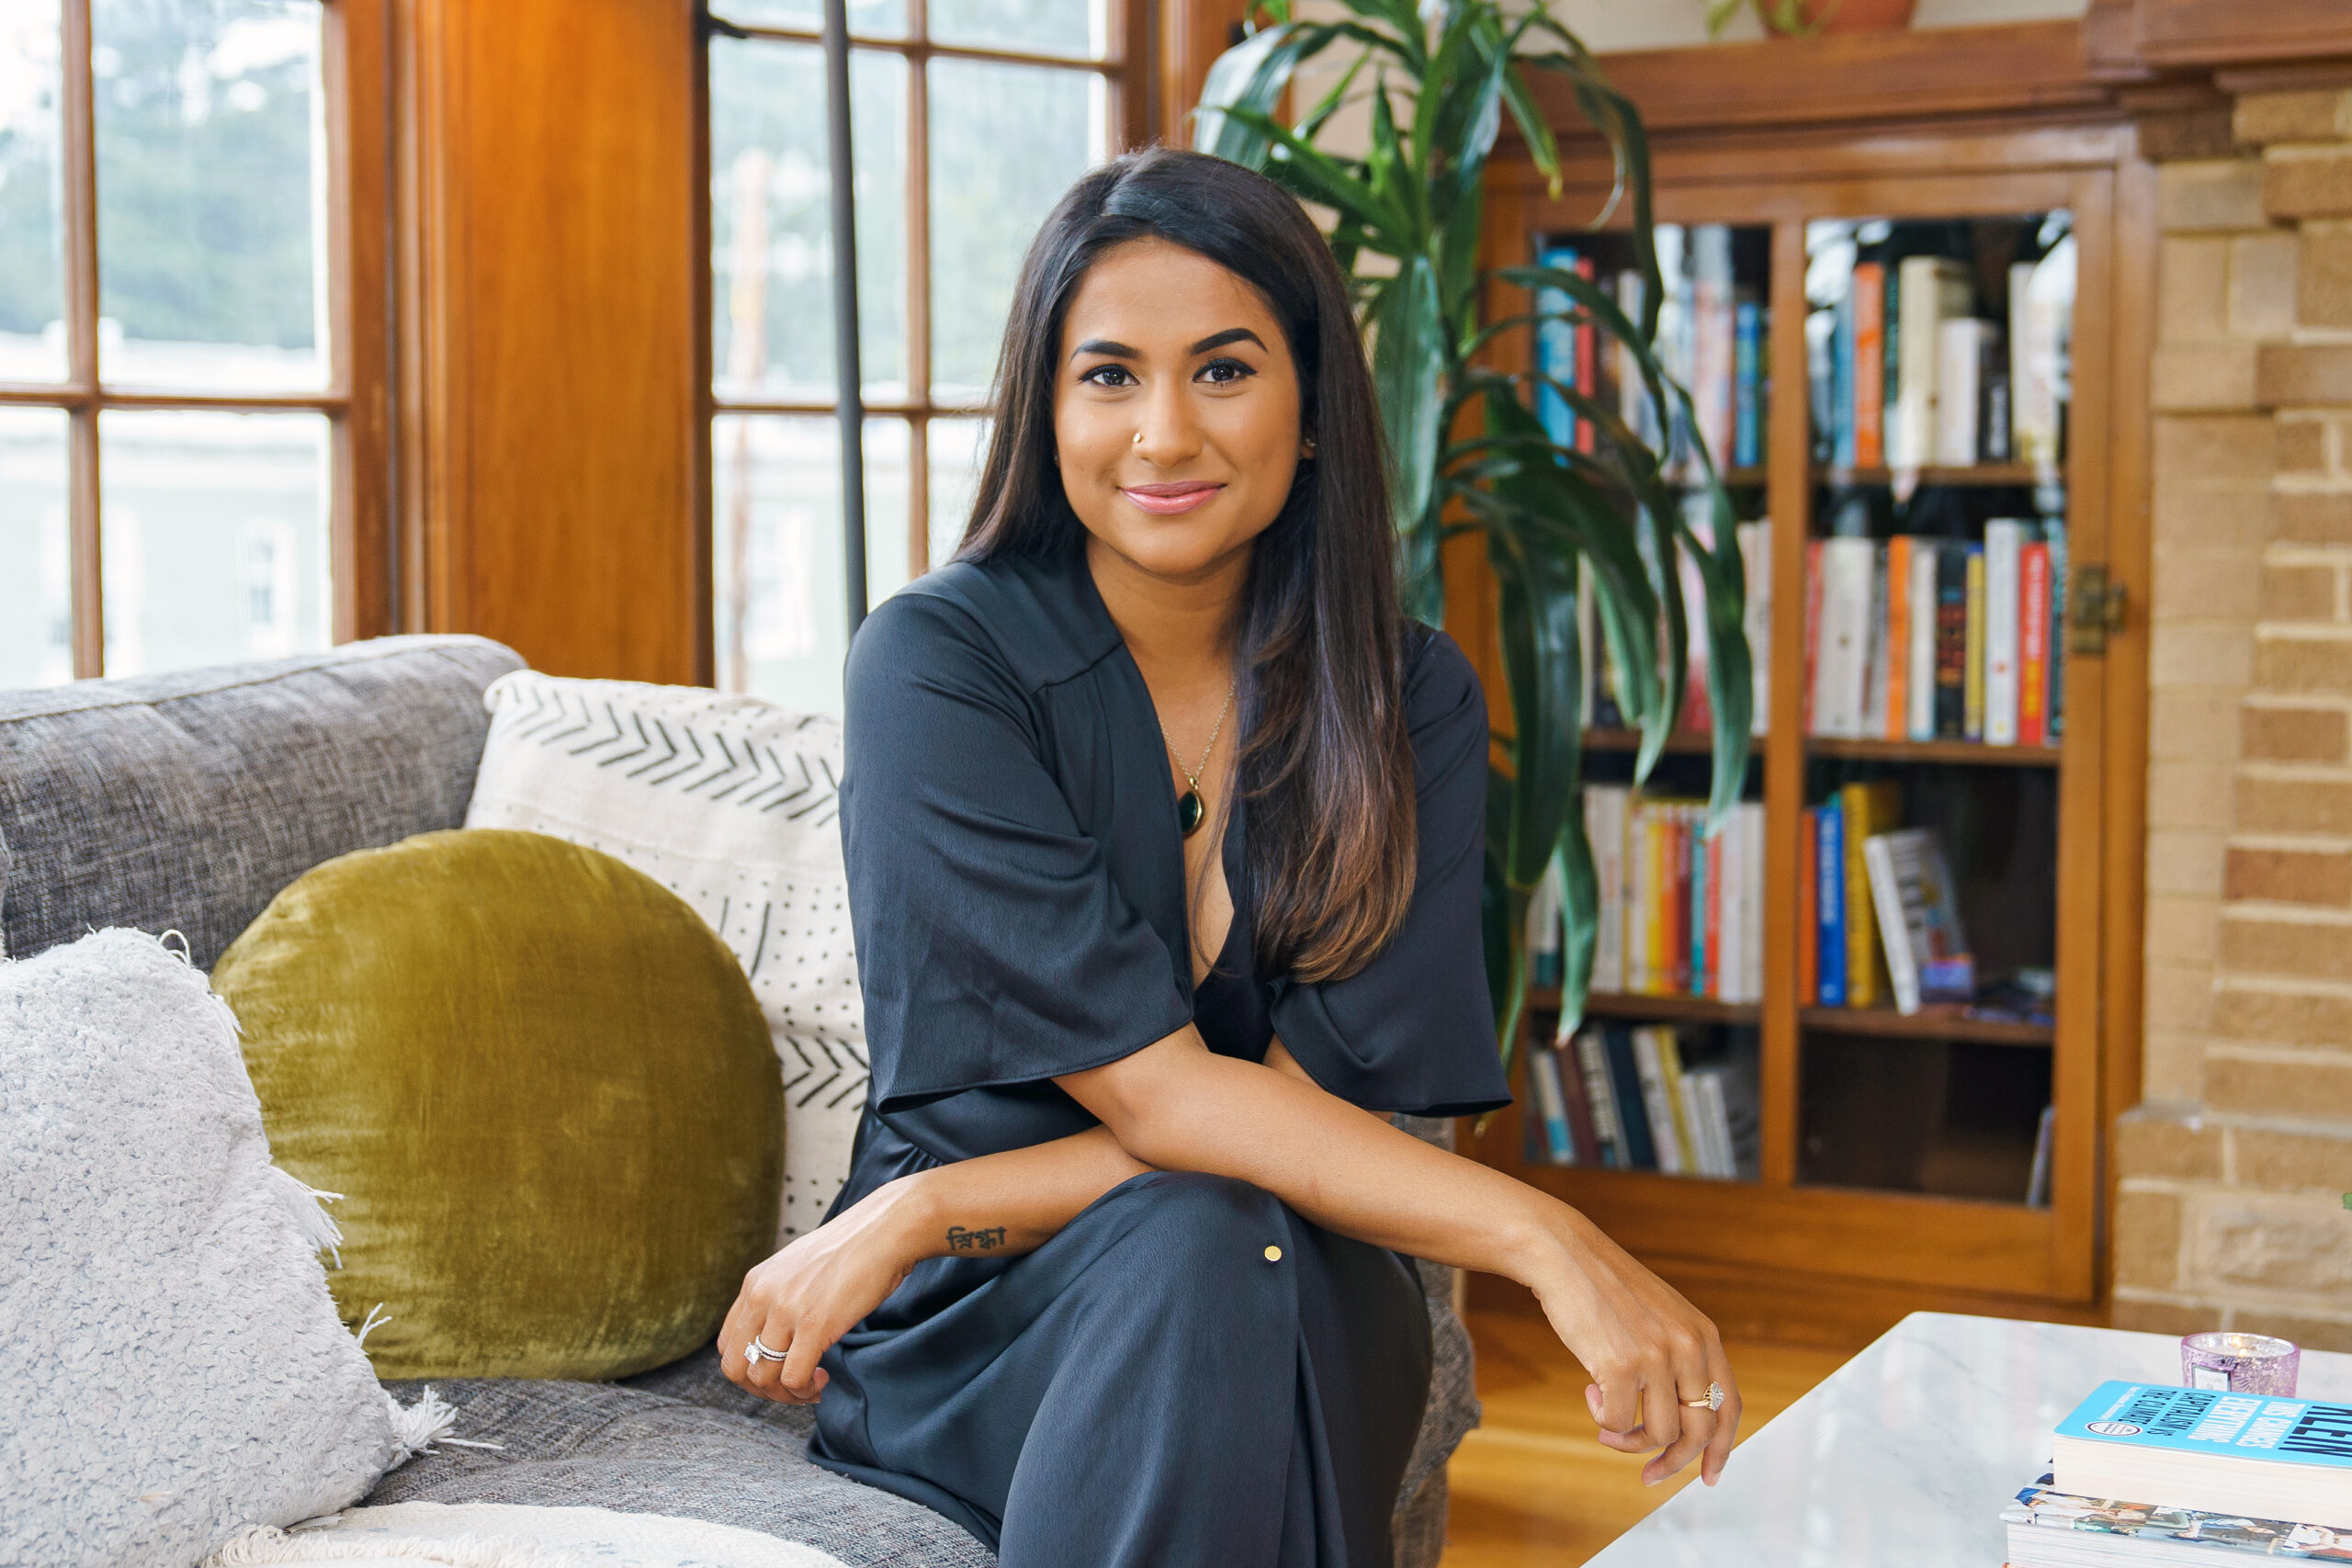 Maisa Mumtaz-Cassidy, founder and CEO of Consciously.